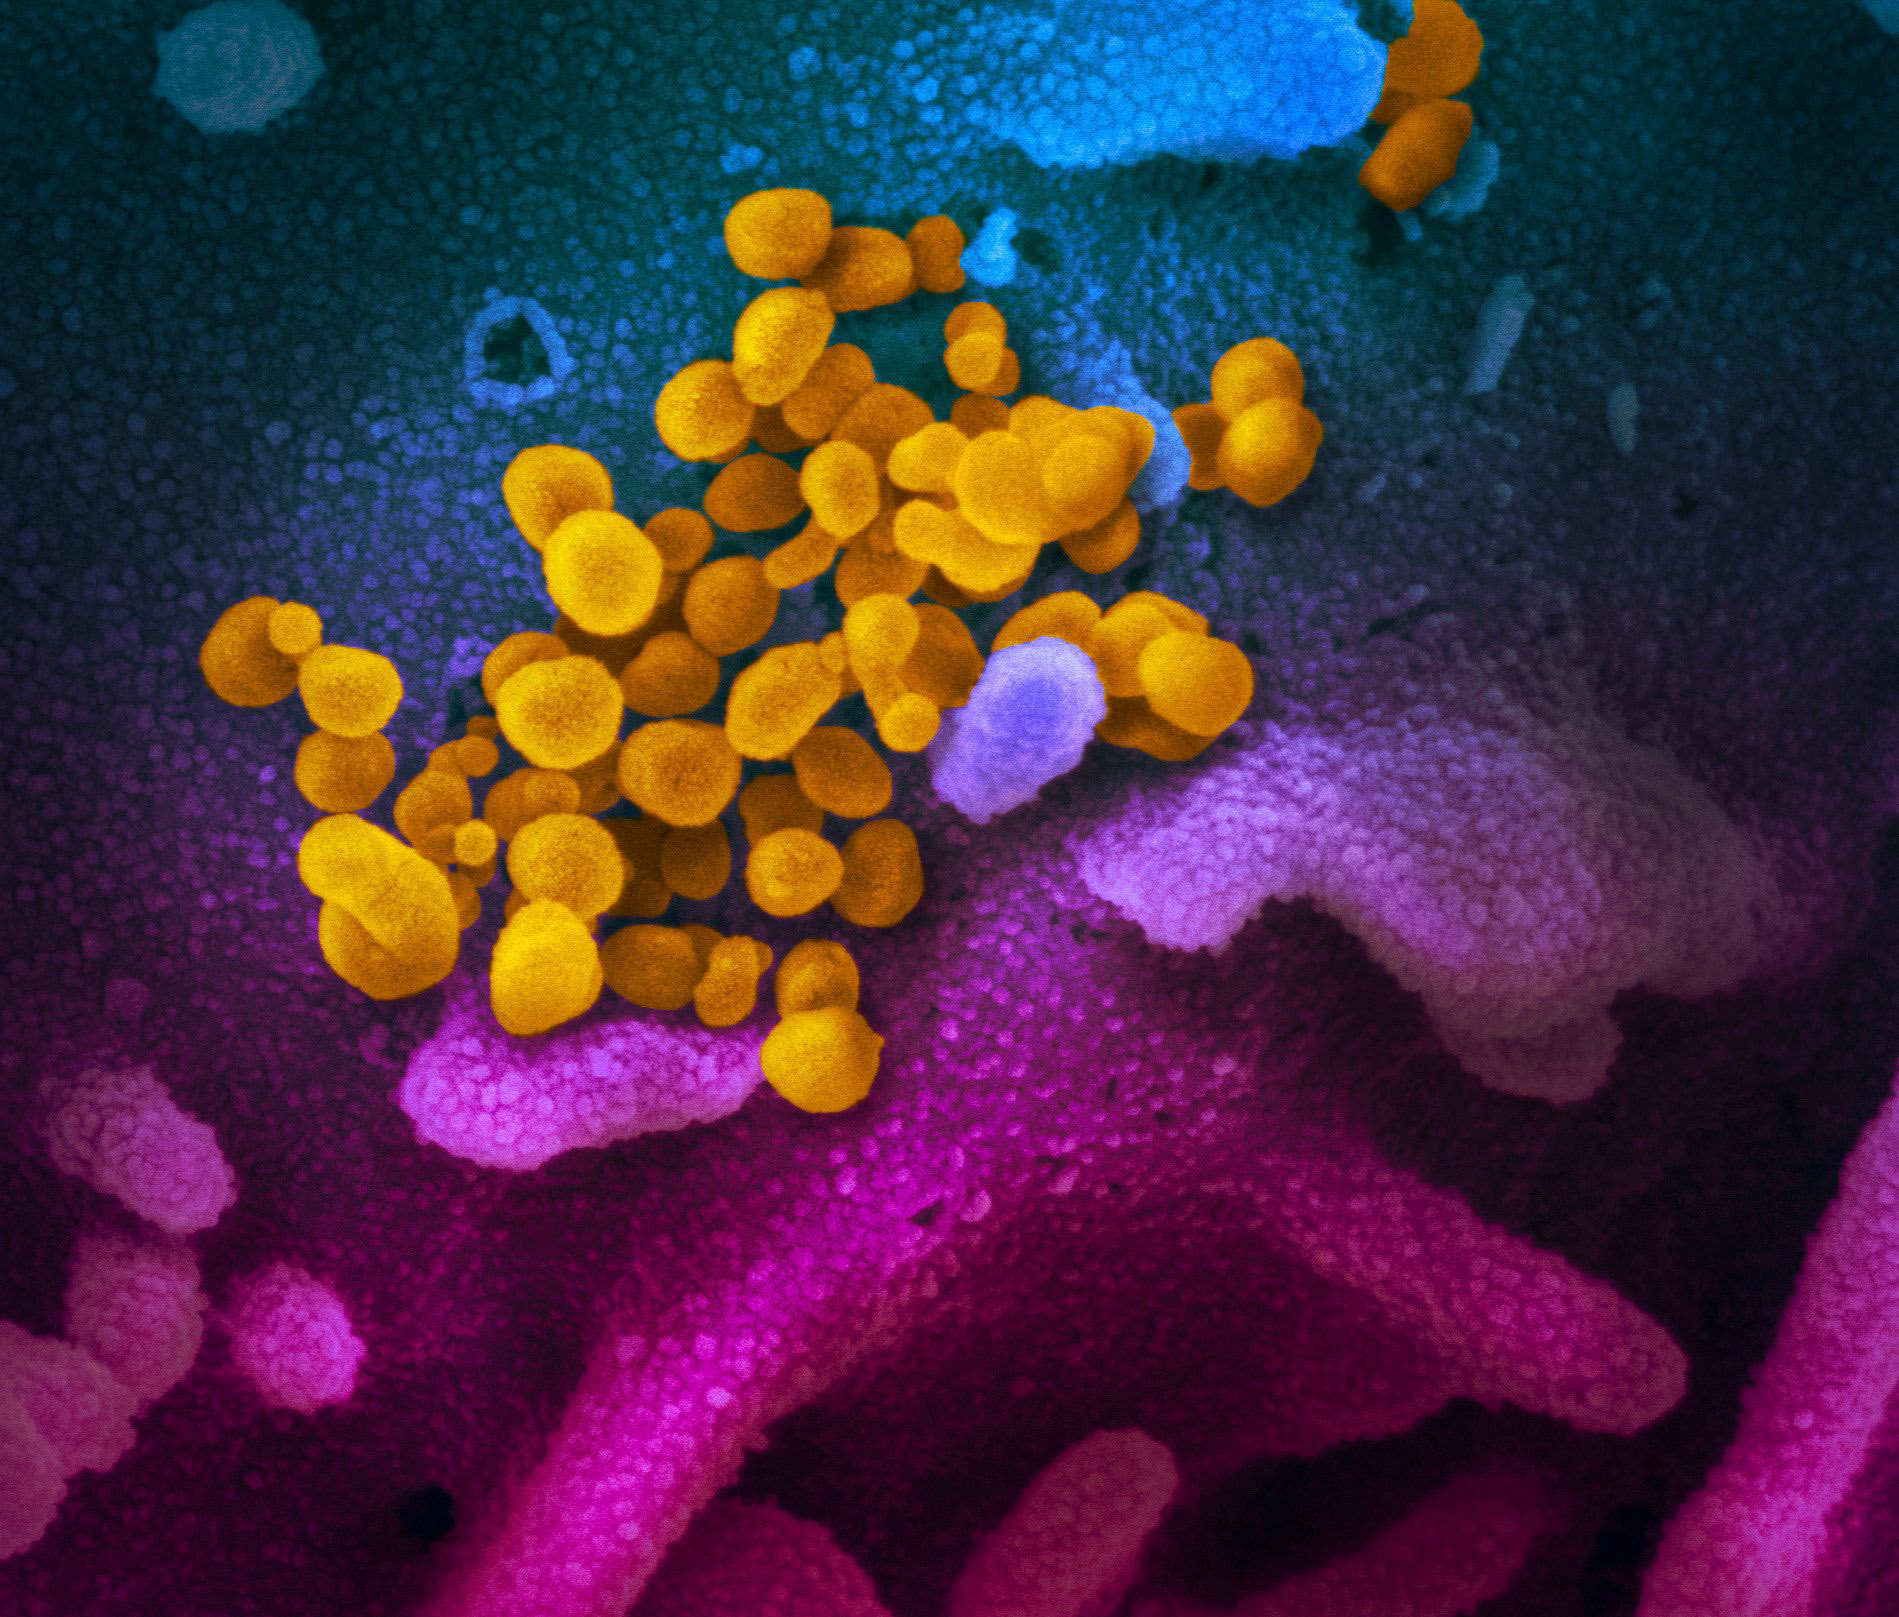 PHOTO: This handout illustration image taken with a scanning electron microscope shows SARS-CoV-2 (yellow)also known as 2019-nCoV, the virus that causes COVID-19isolated emerging from the surface of cells (blue/pink) cultured in the lab.